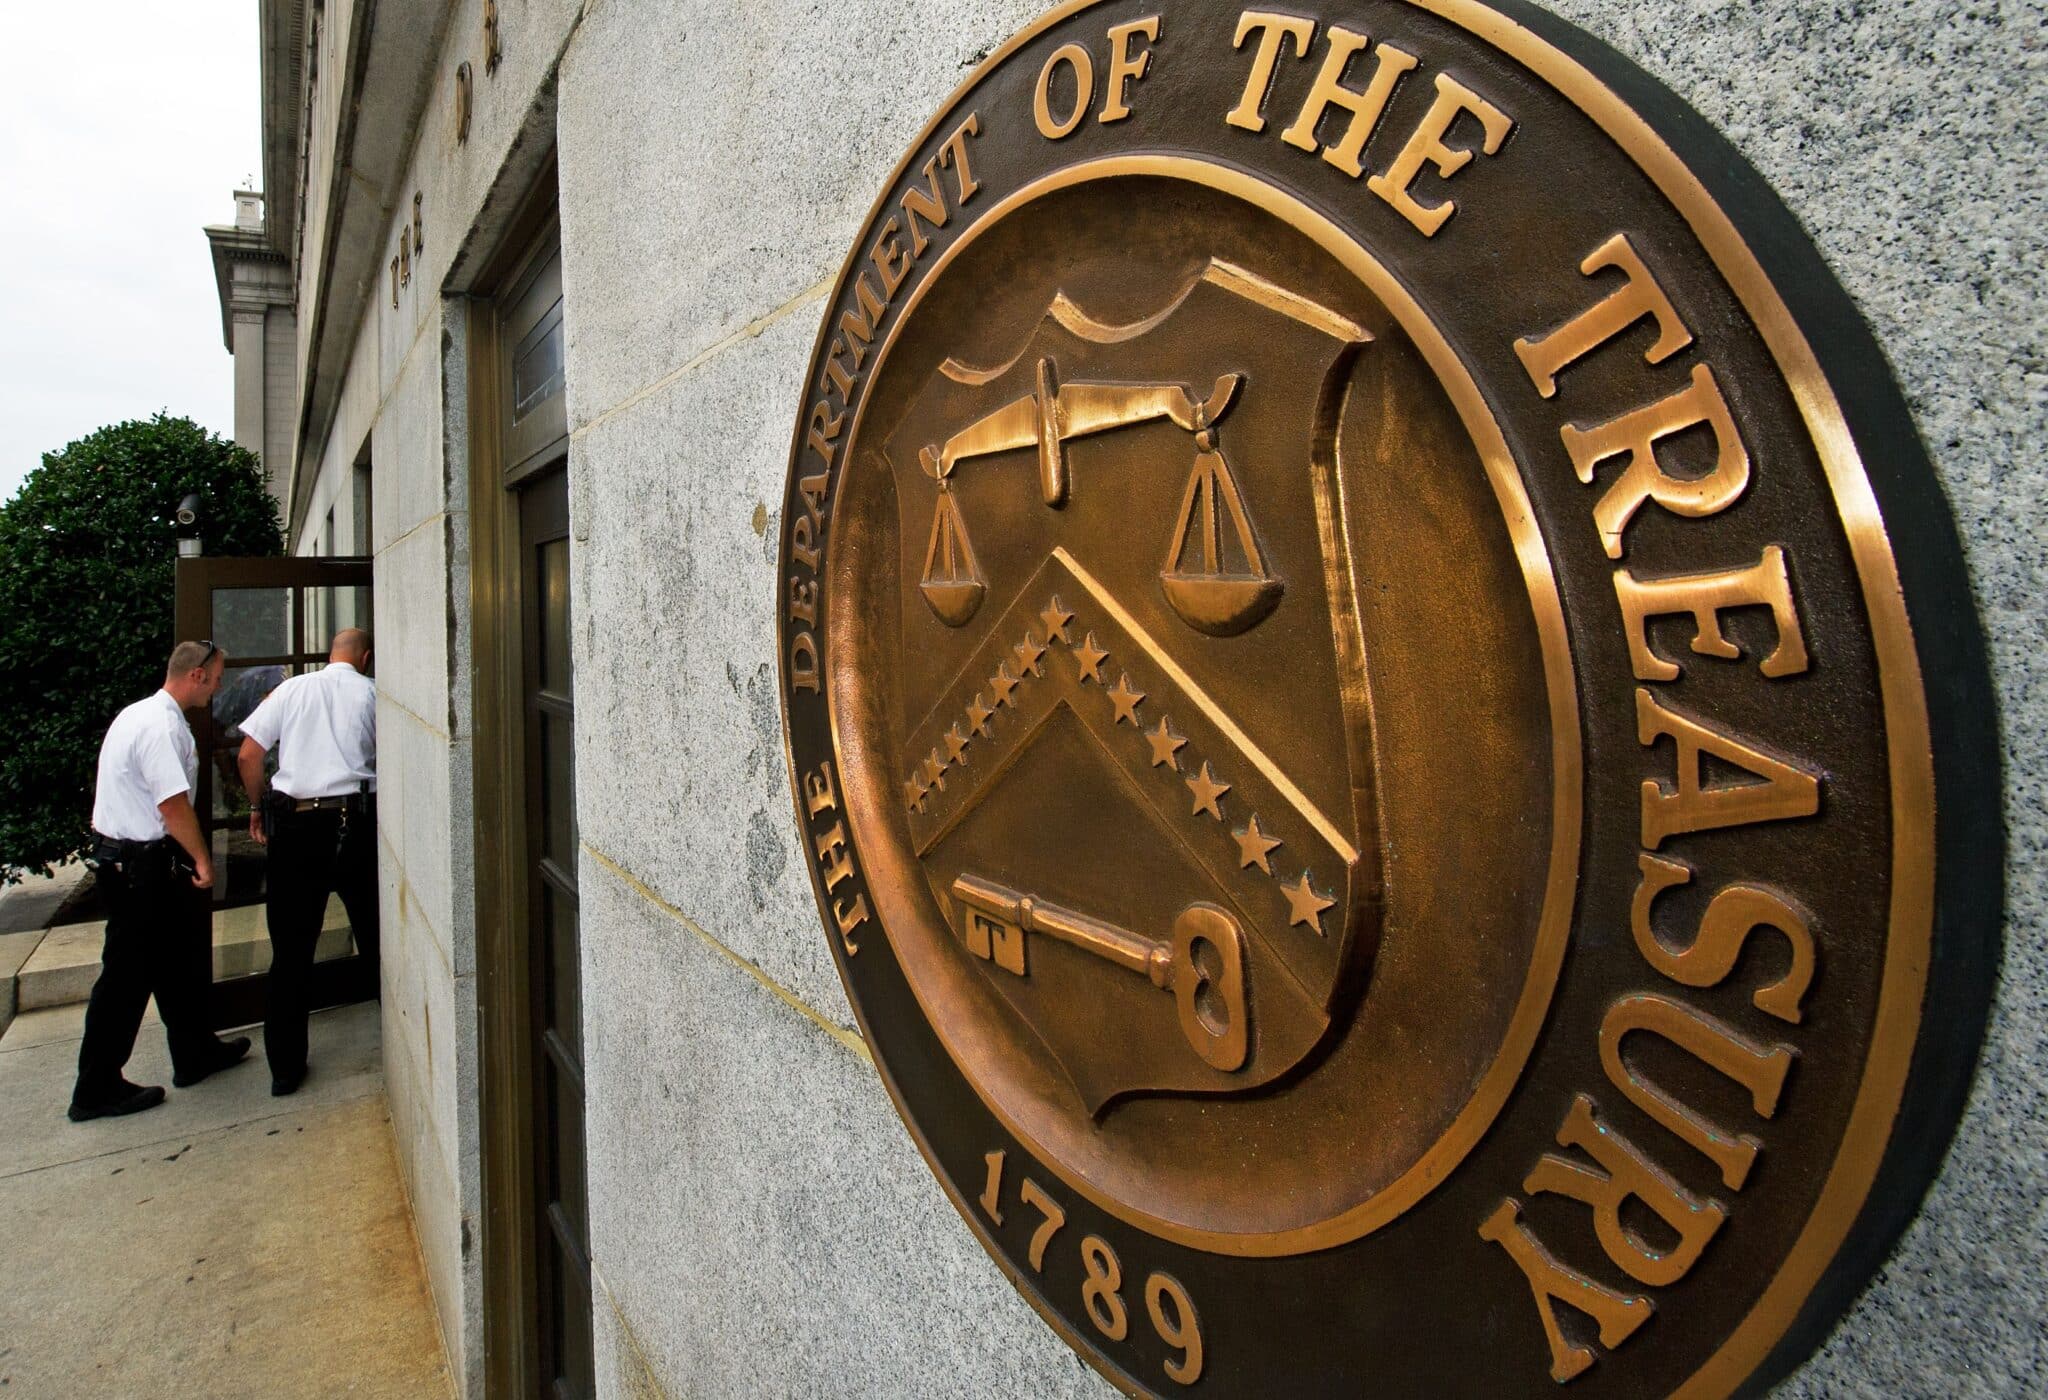 Entrance to the US Department of the Treasure with a closeup to its coat of arms. File photo.